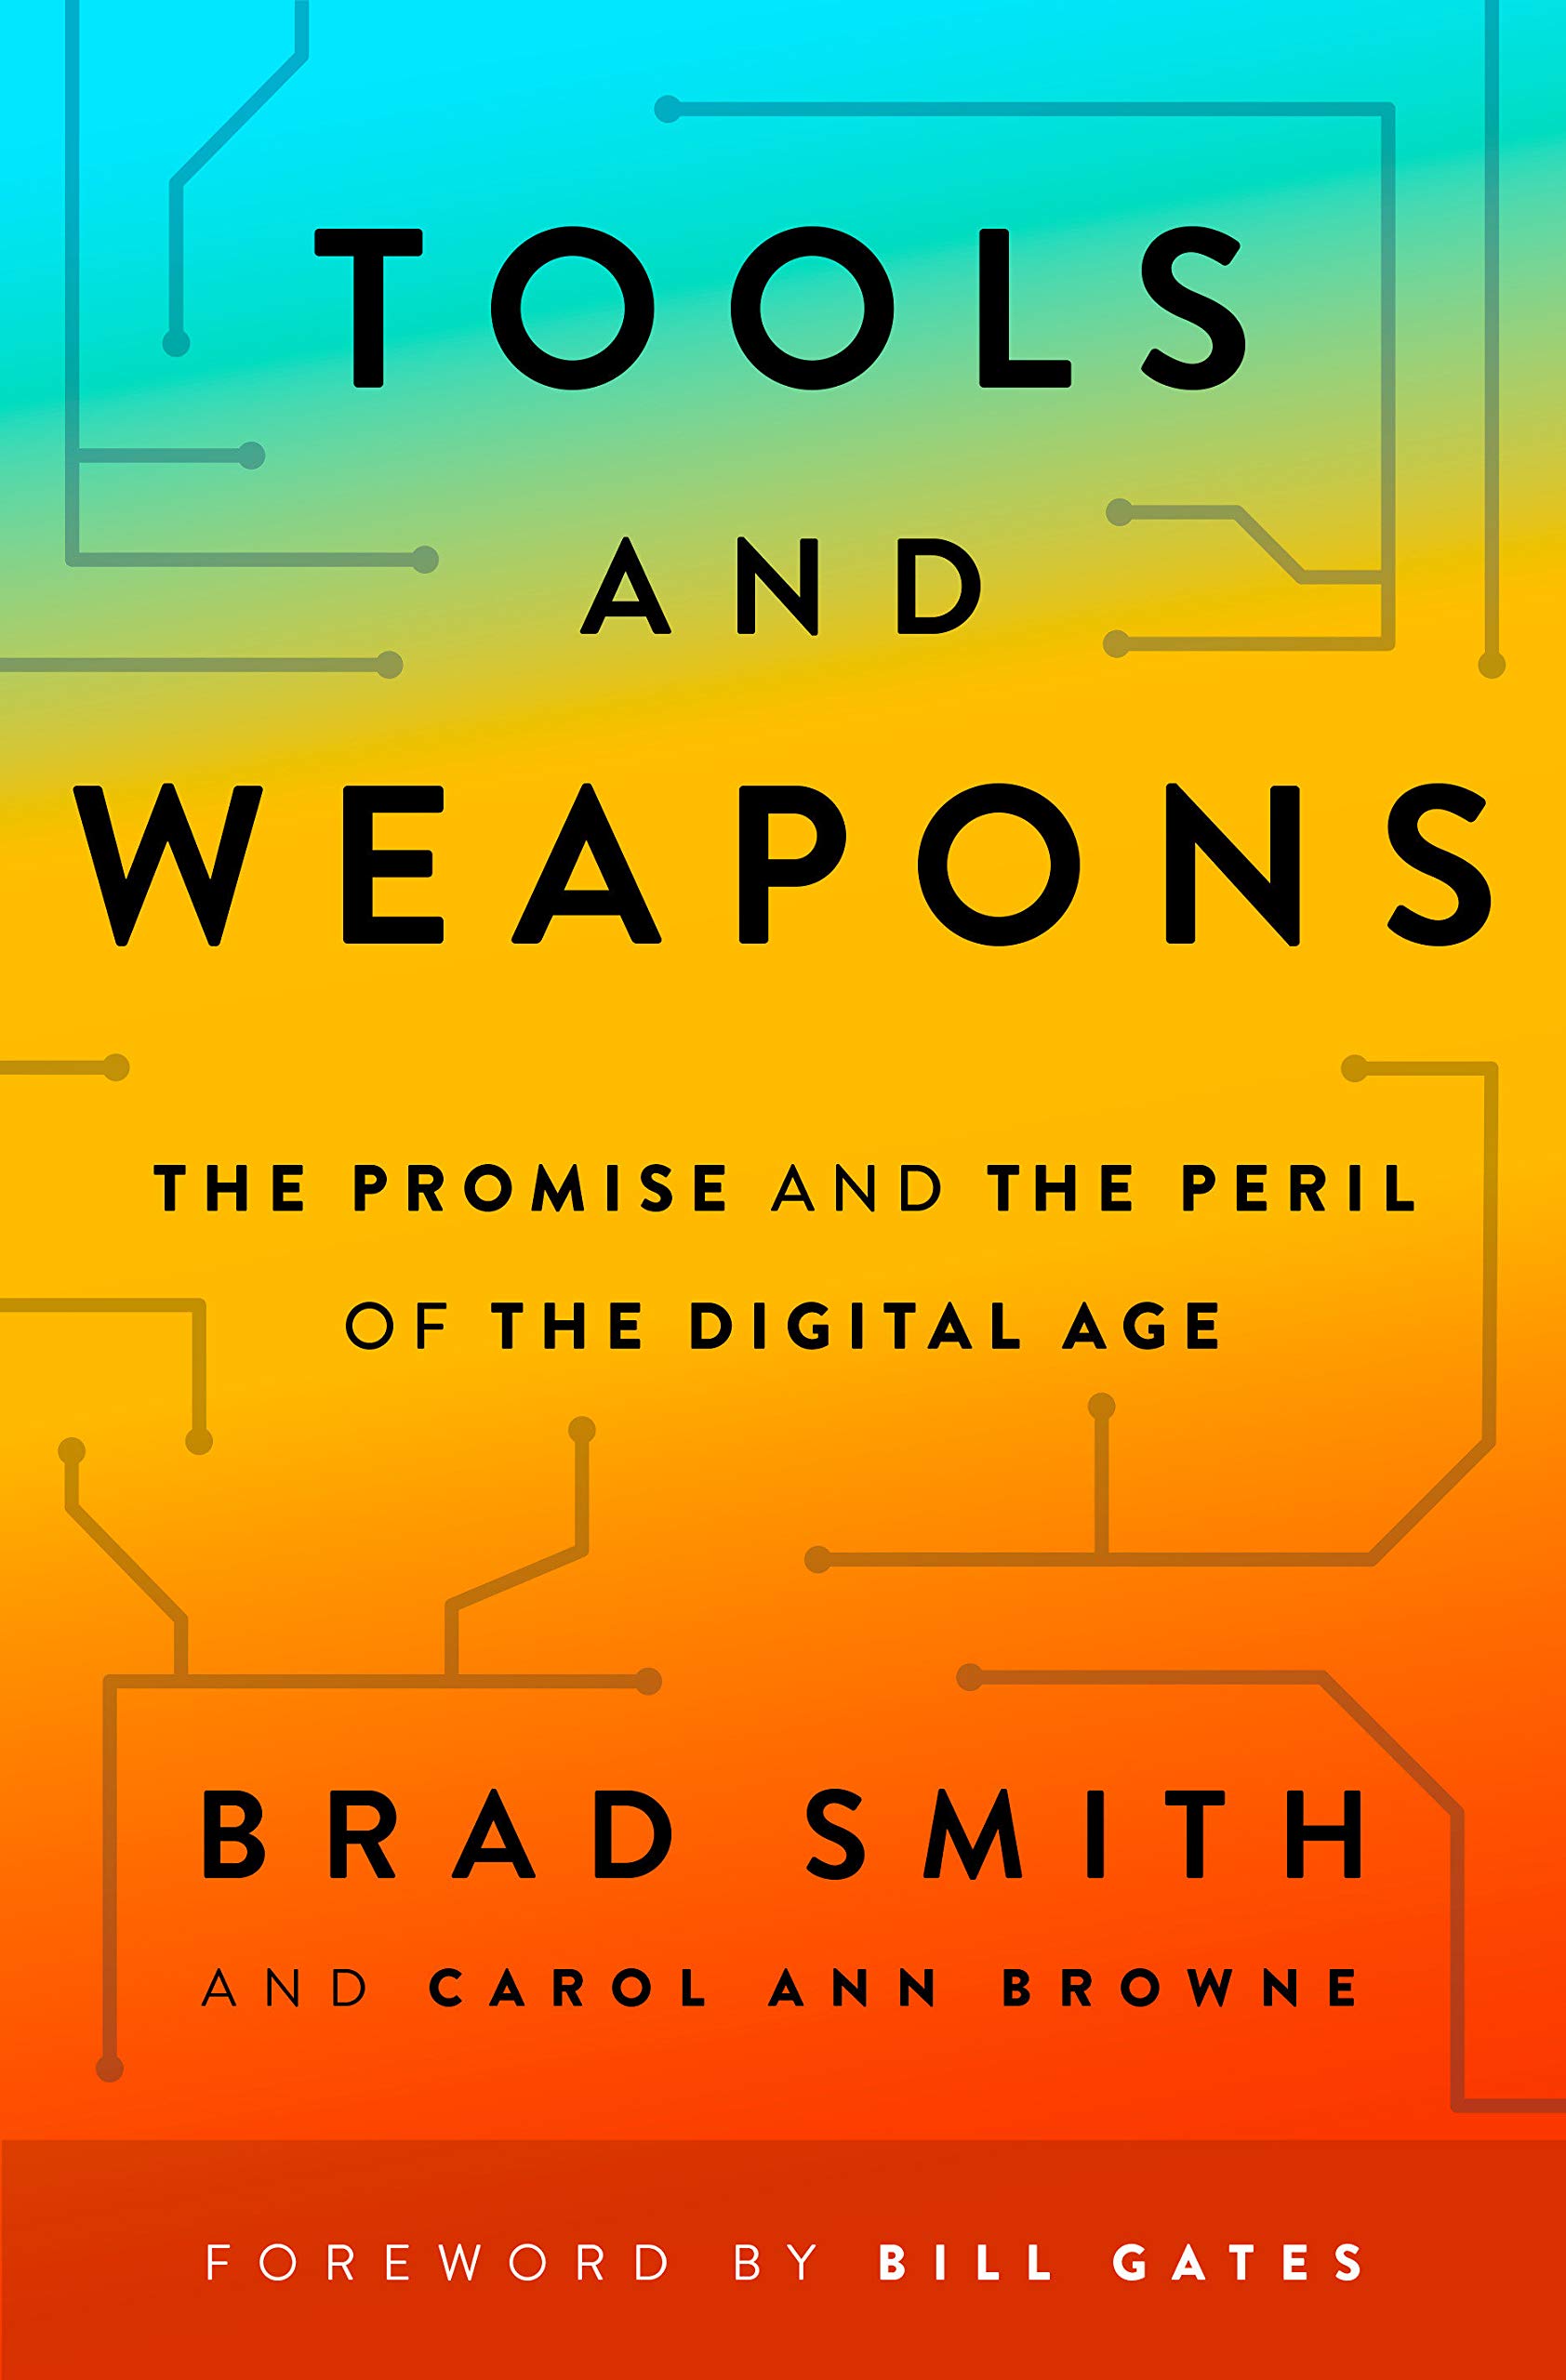 Tools and Weapons | Brad Smith, Carol Ann Browne